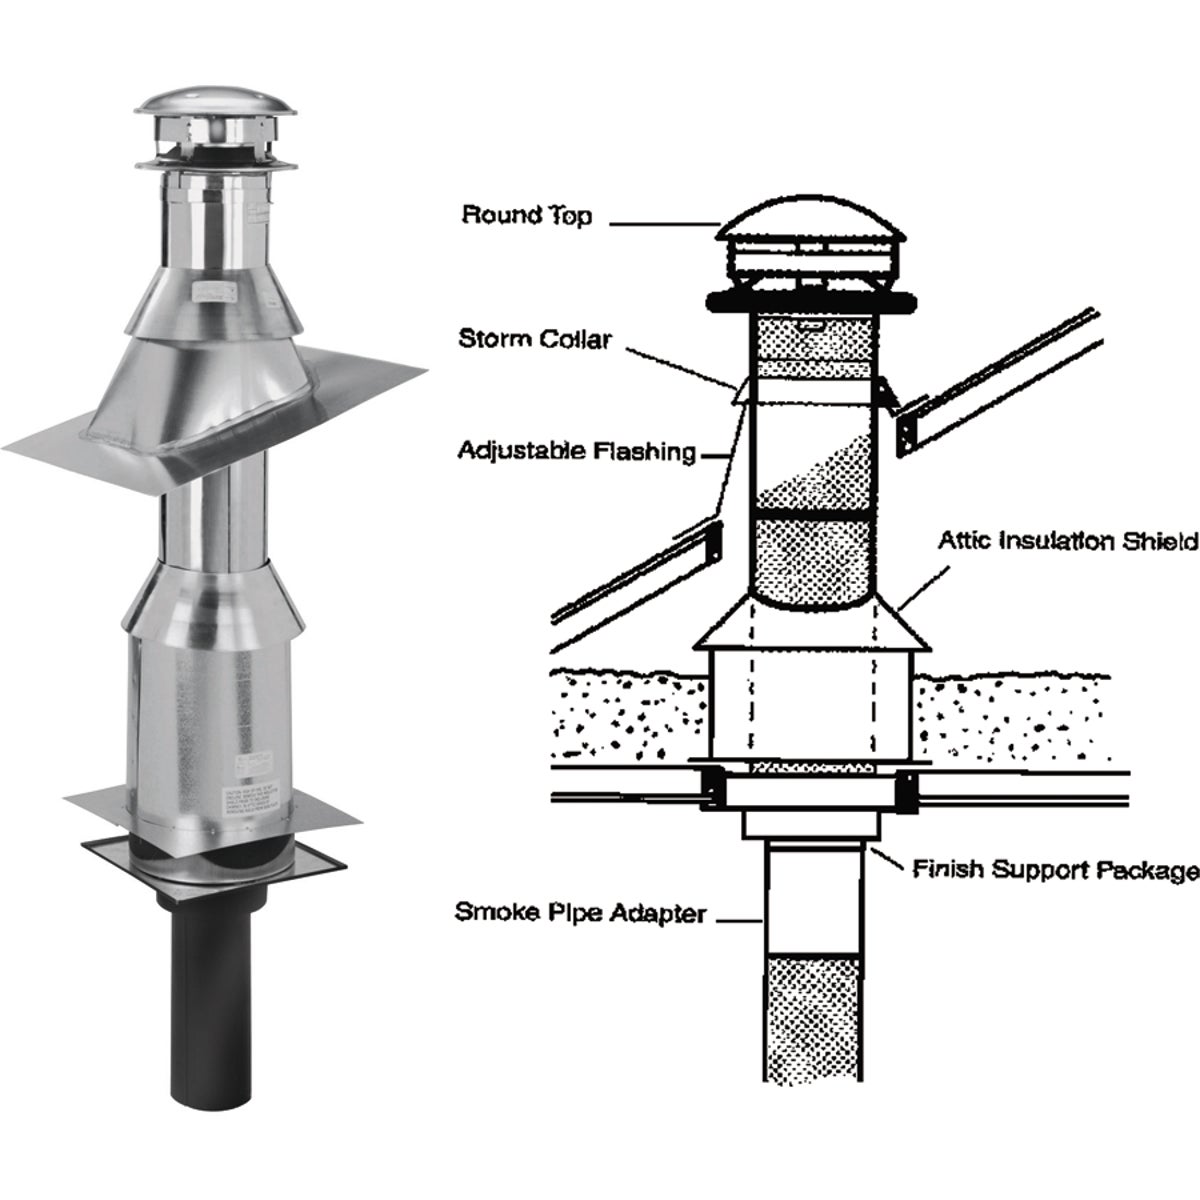 Item 462195, Provides the support package and termination parts for a chimney that is 